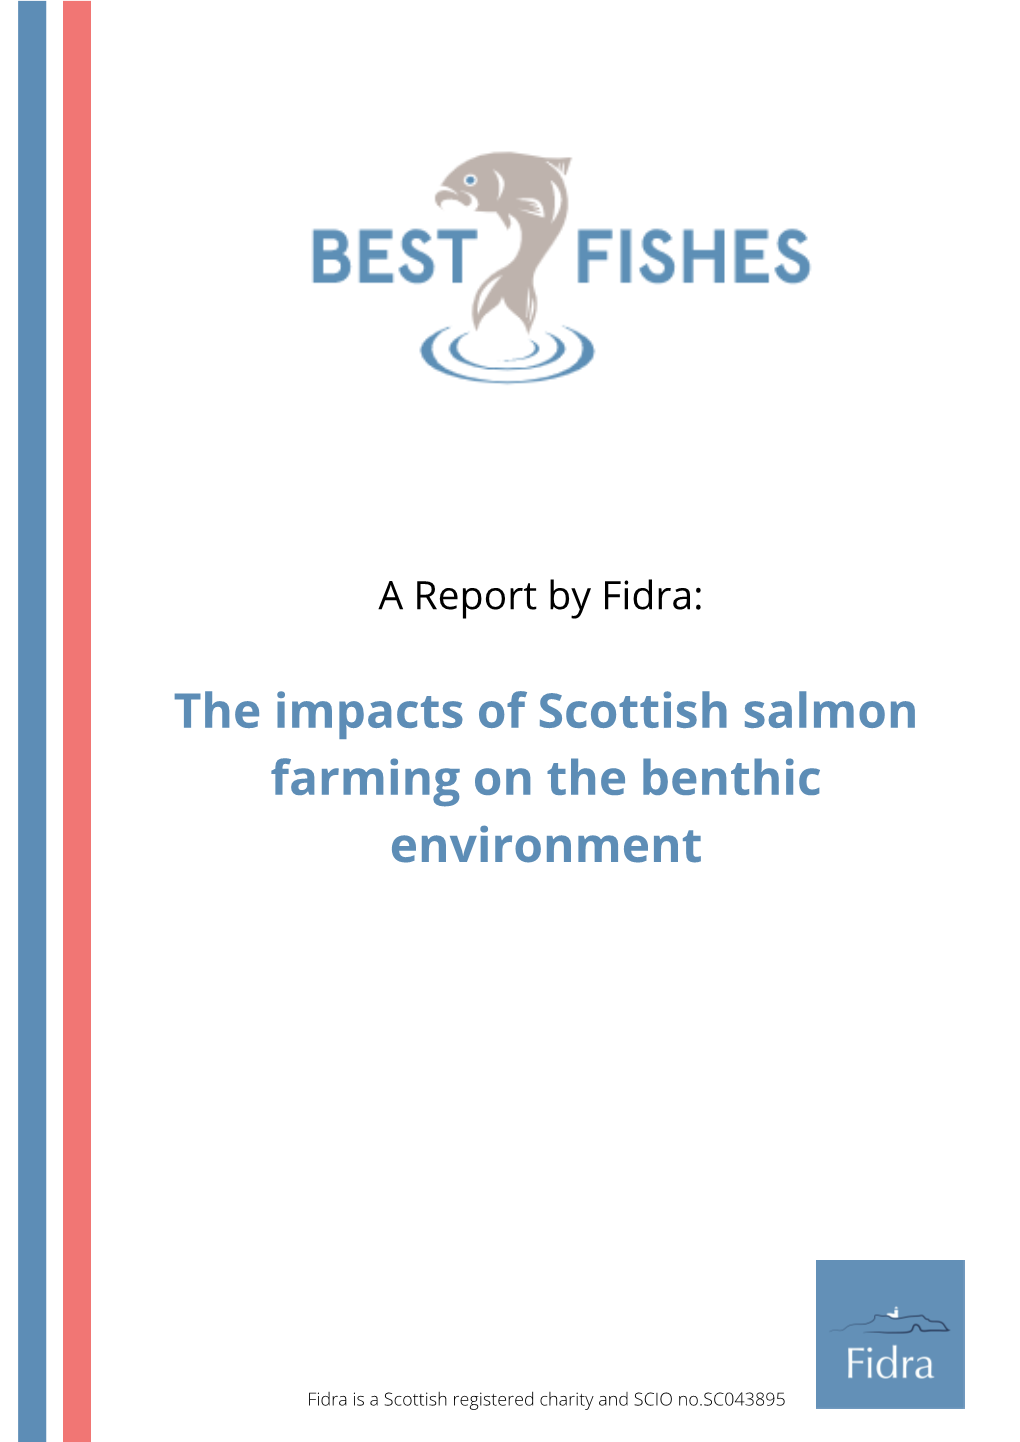 The Impacts of Scottish Salmon Farming on the Benthic Environment